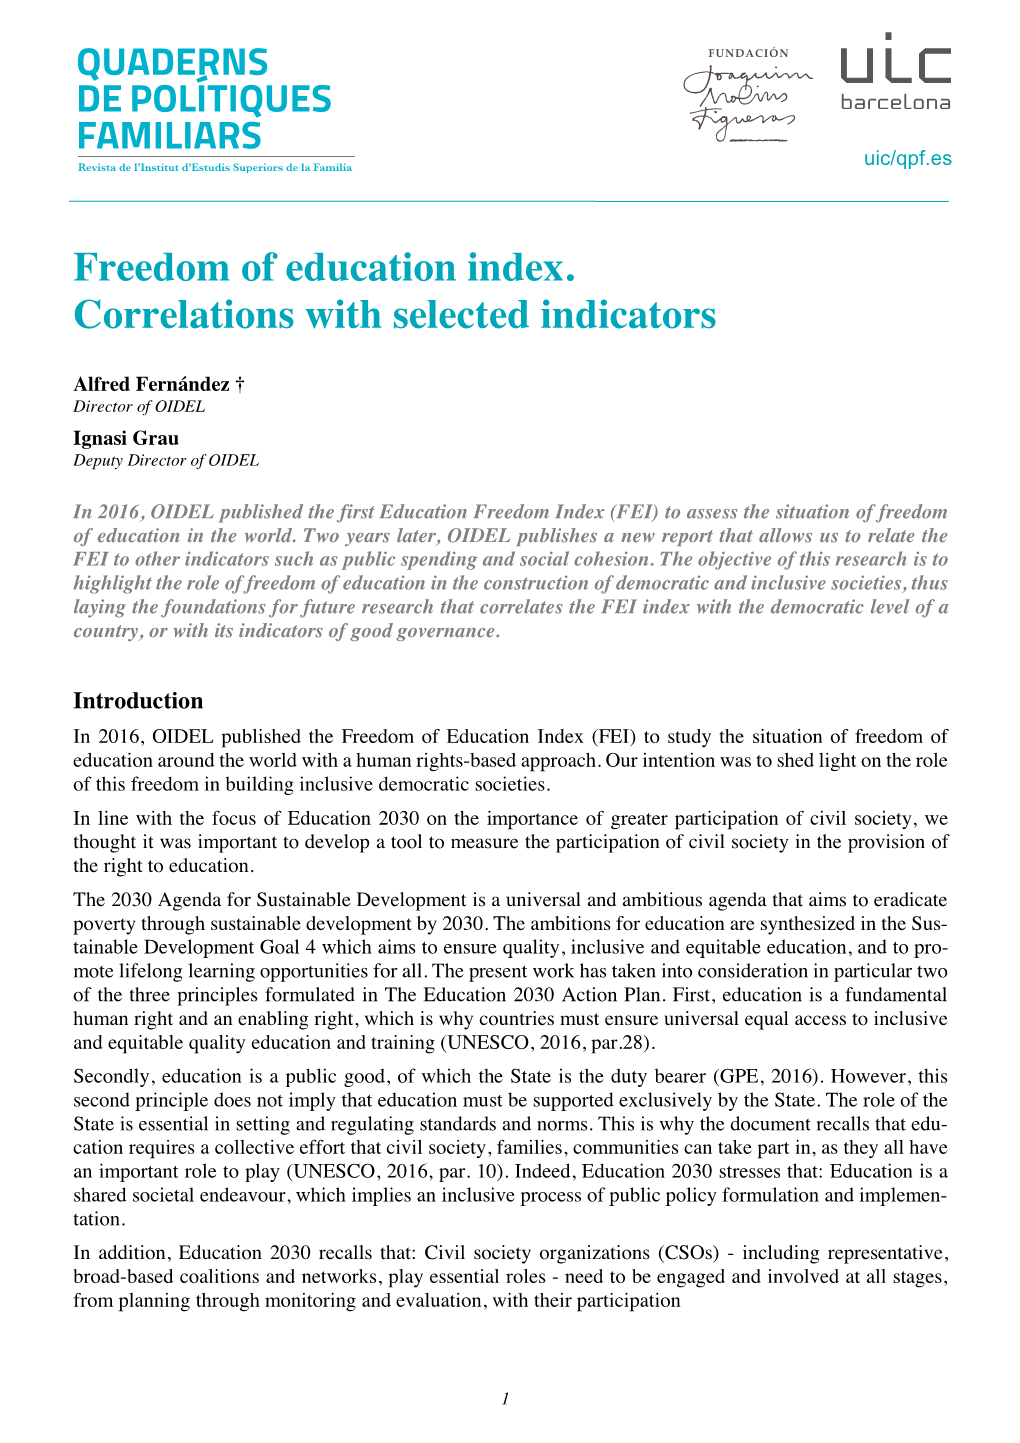 Freedom of Education Index. Correlations with Selected Indicators